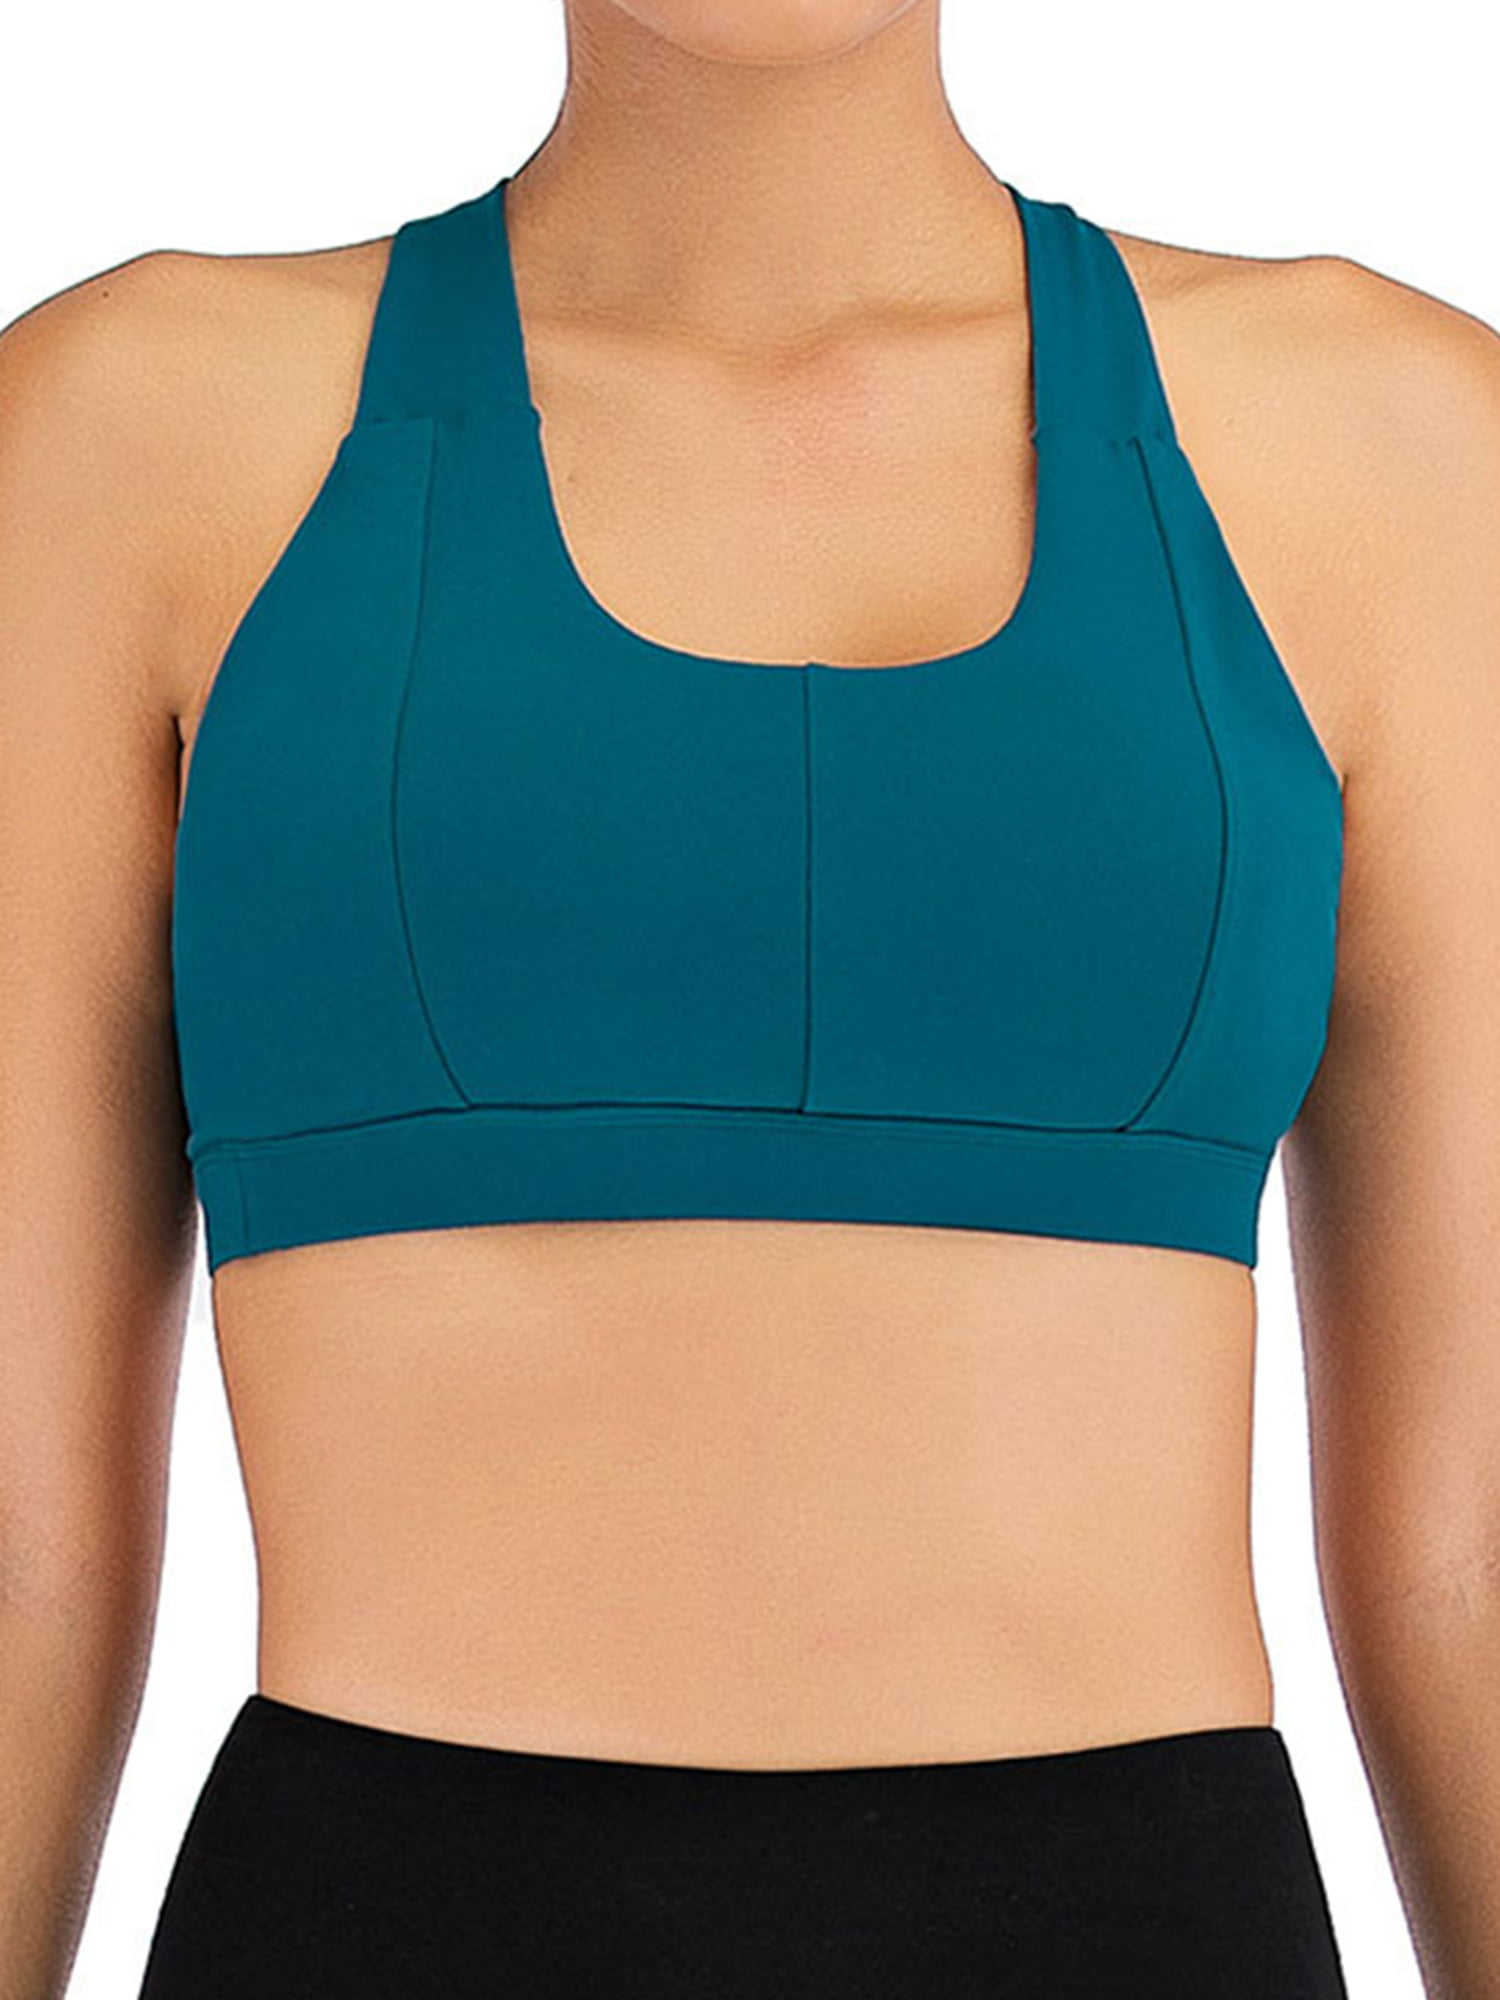 Yoga Tops With Built In Bra Canada Travel  International Society of  Precision Agriculture